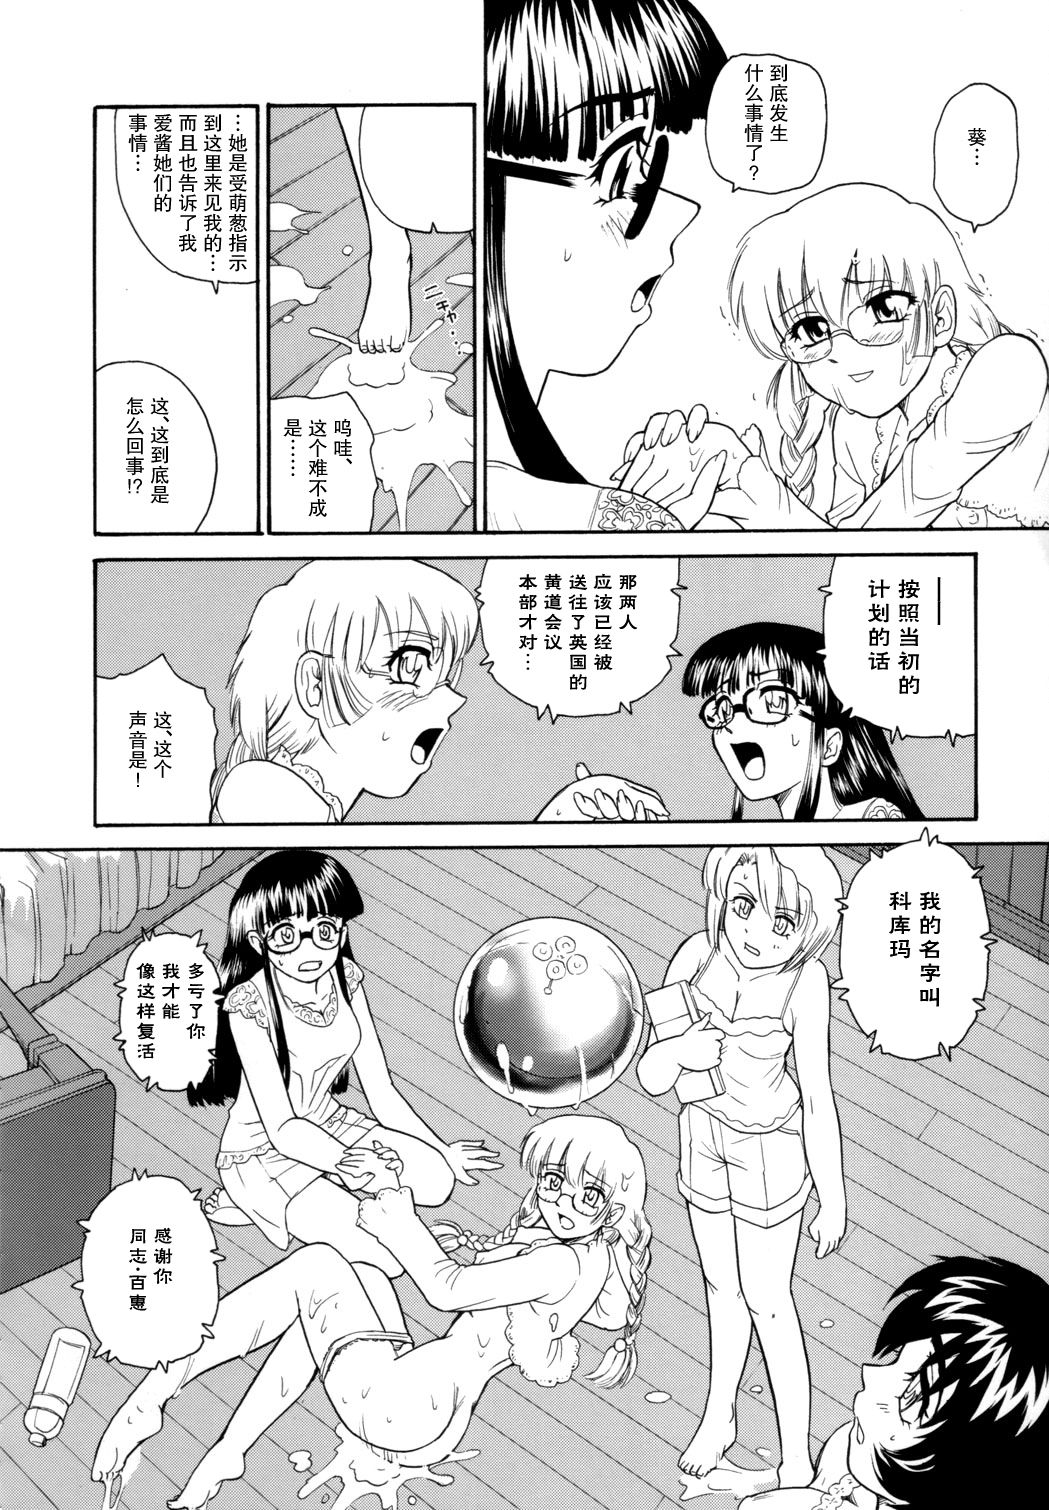 (C72) [Behind Moon (Q)] Dulce Report 9 | 达西报告 9 [Chinese] [哈尼喵汉化组] [Decensored] page 24 full